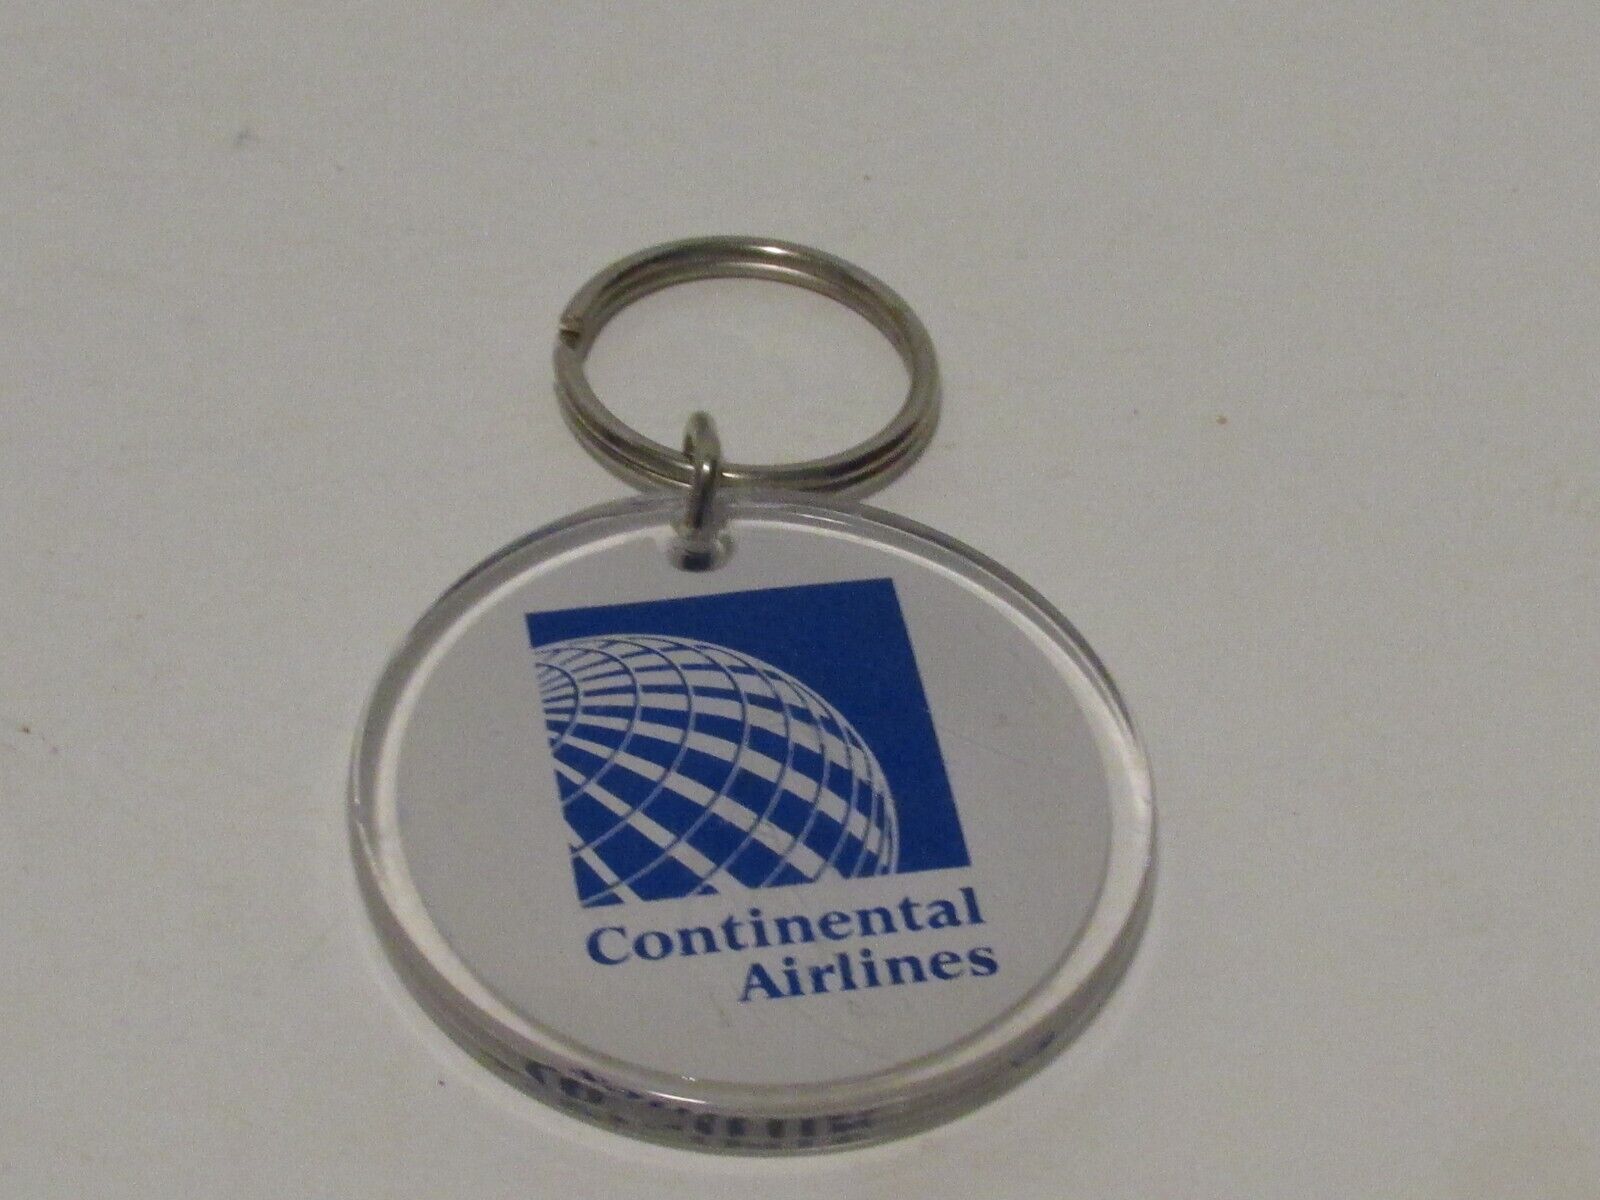 Continental Airlines Keychain